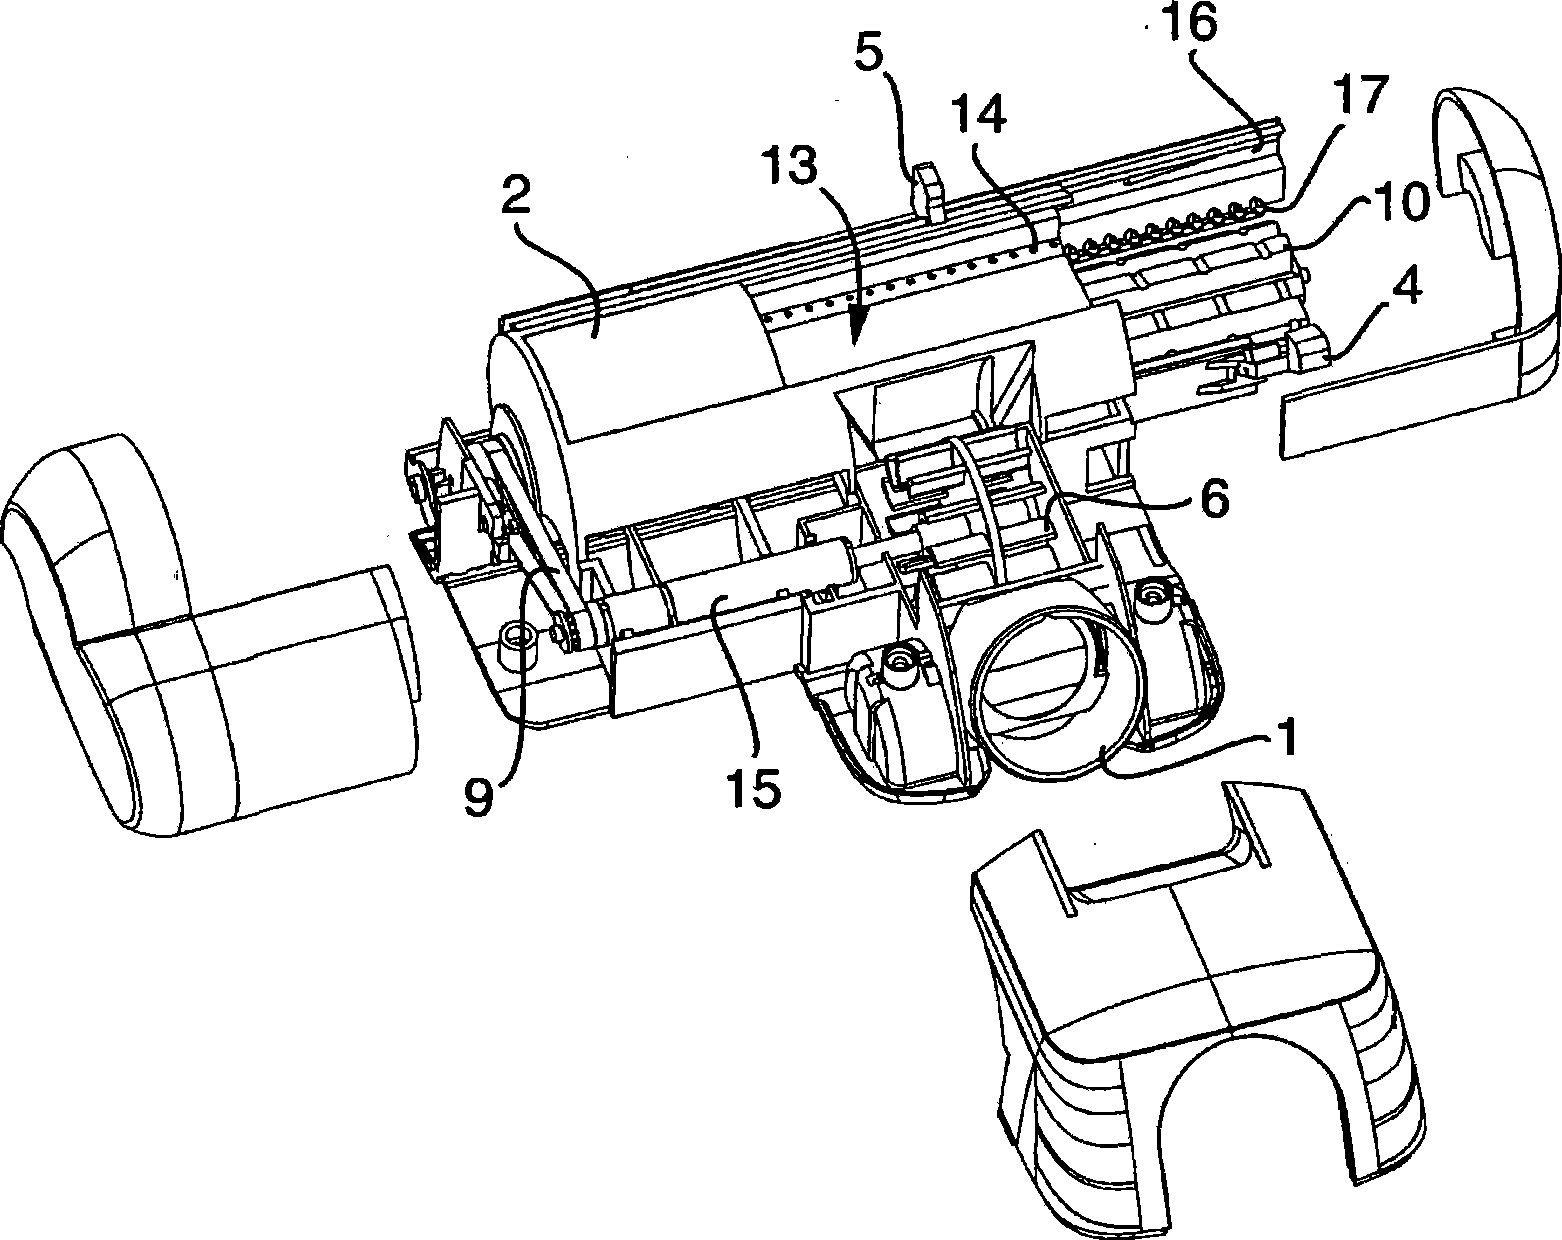 A carpet cleaning device and a method for cleaning a carpet